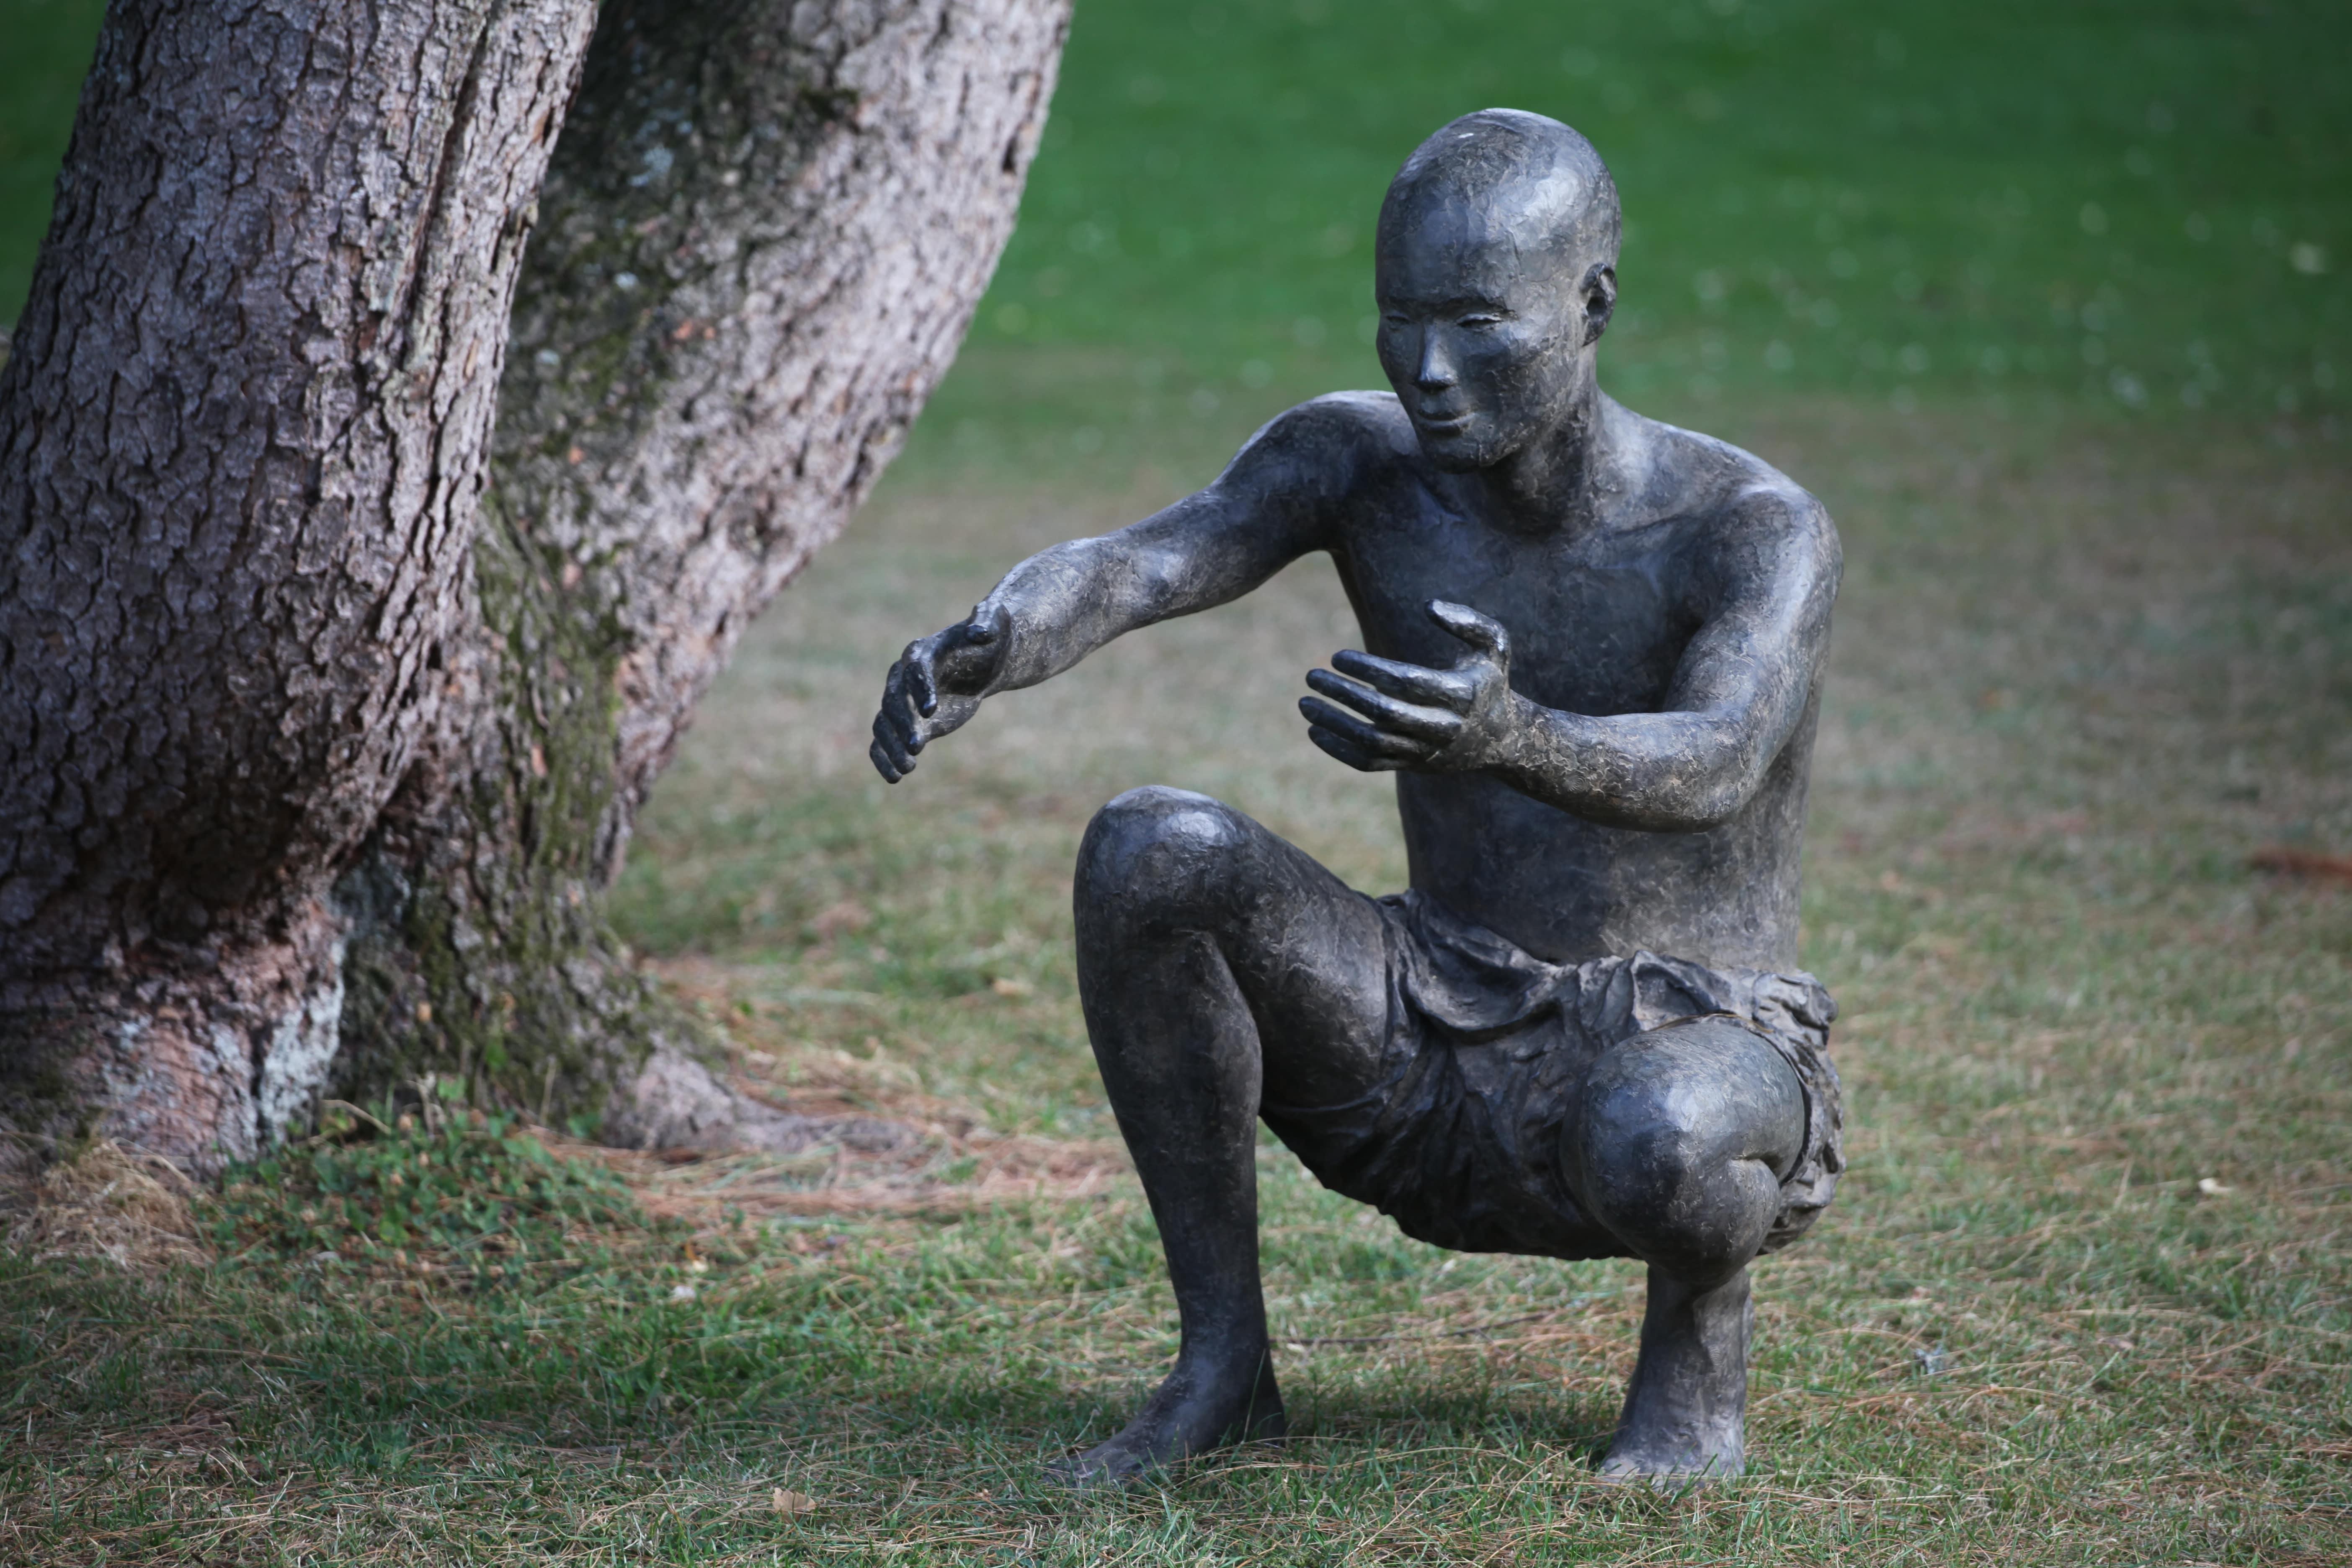 The Welcome is a monumental bronze sculpture by French contemporary artist Marine de Soos, dimensions are 110 × 53 × 93 cm (43.3 × 20.9 × 36.6 in). 
The sculpture is signed and numbered, it is part of a limited edition of 8 editions + 4 artist’s